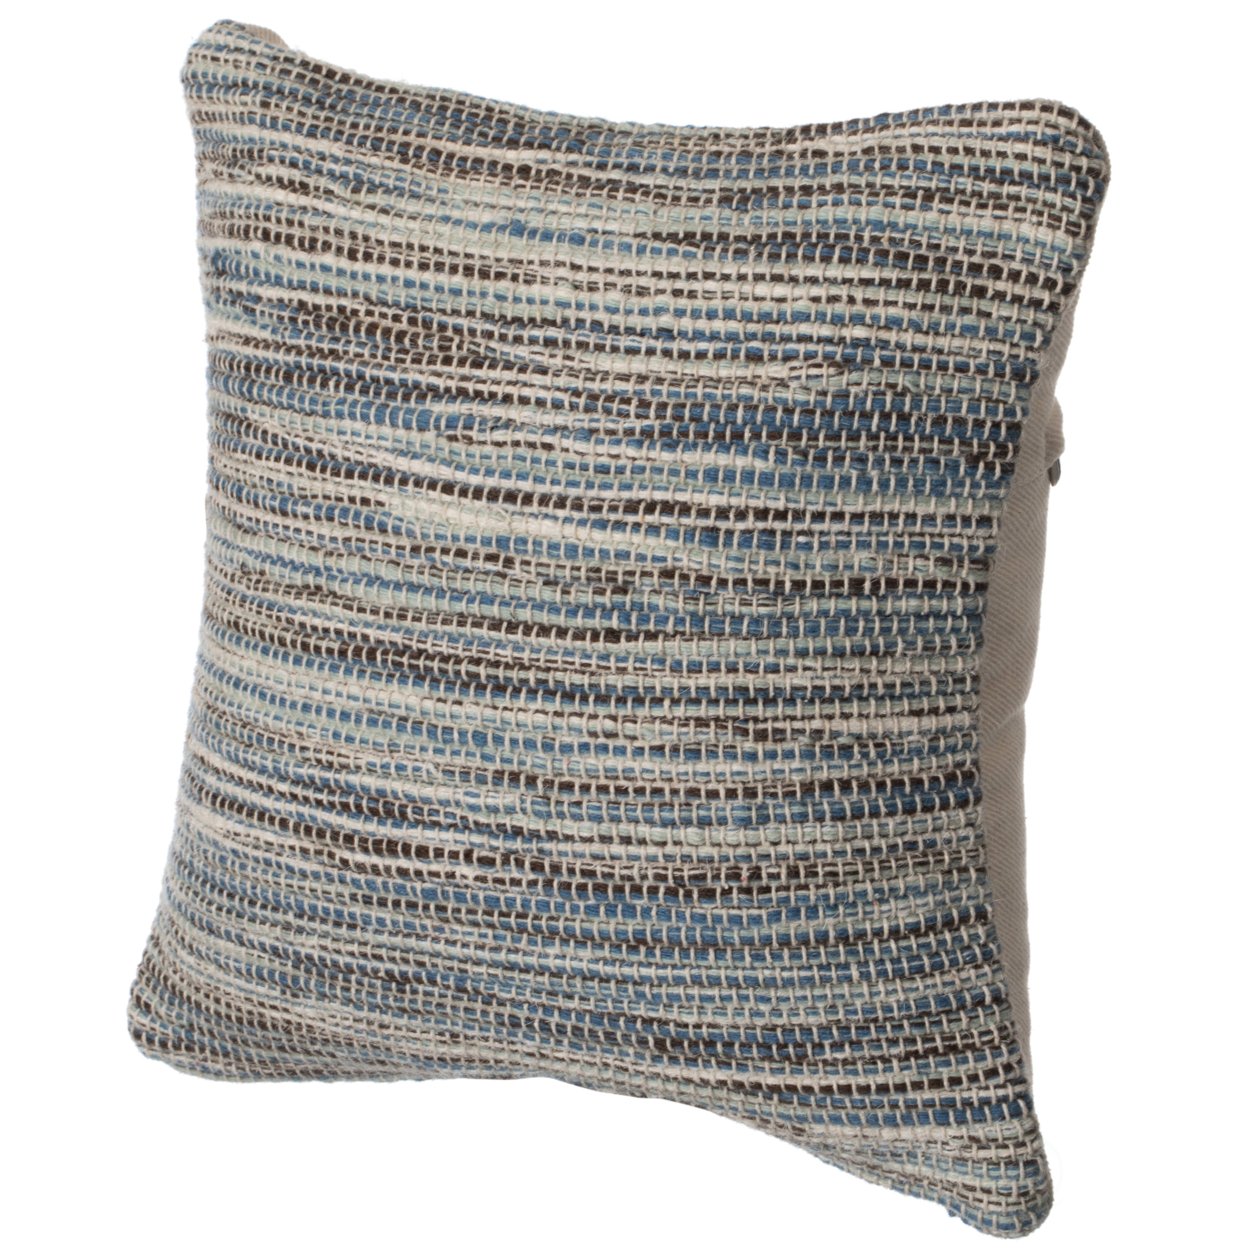 16 Handwoven Wool & Cotton Throw Pillow Cover With Woven Knit Texture - Blue With Cushion